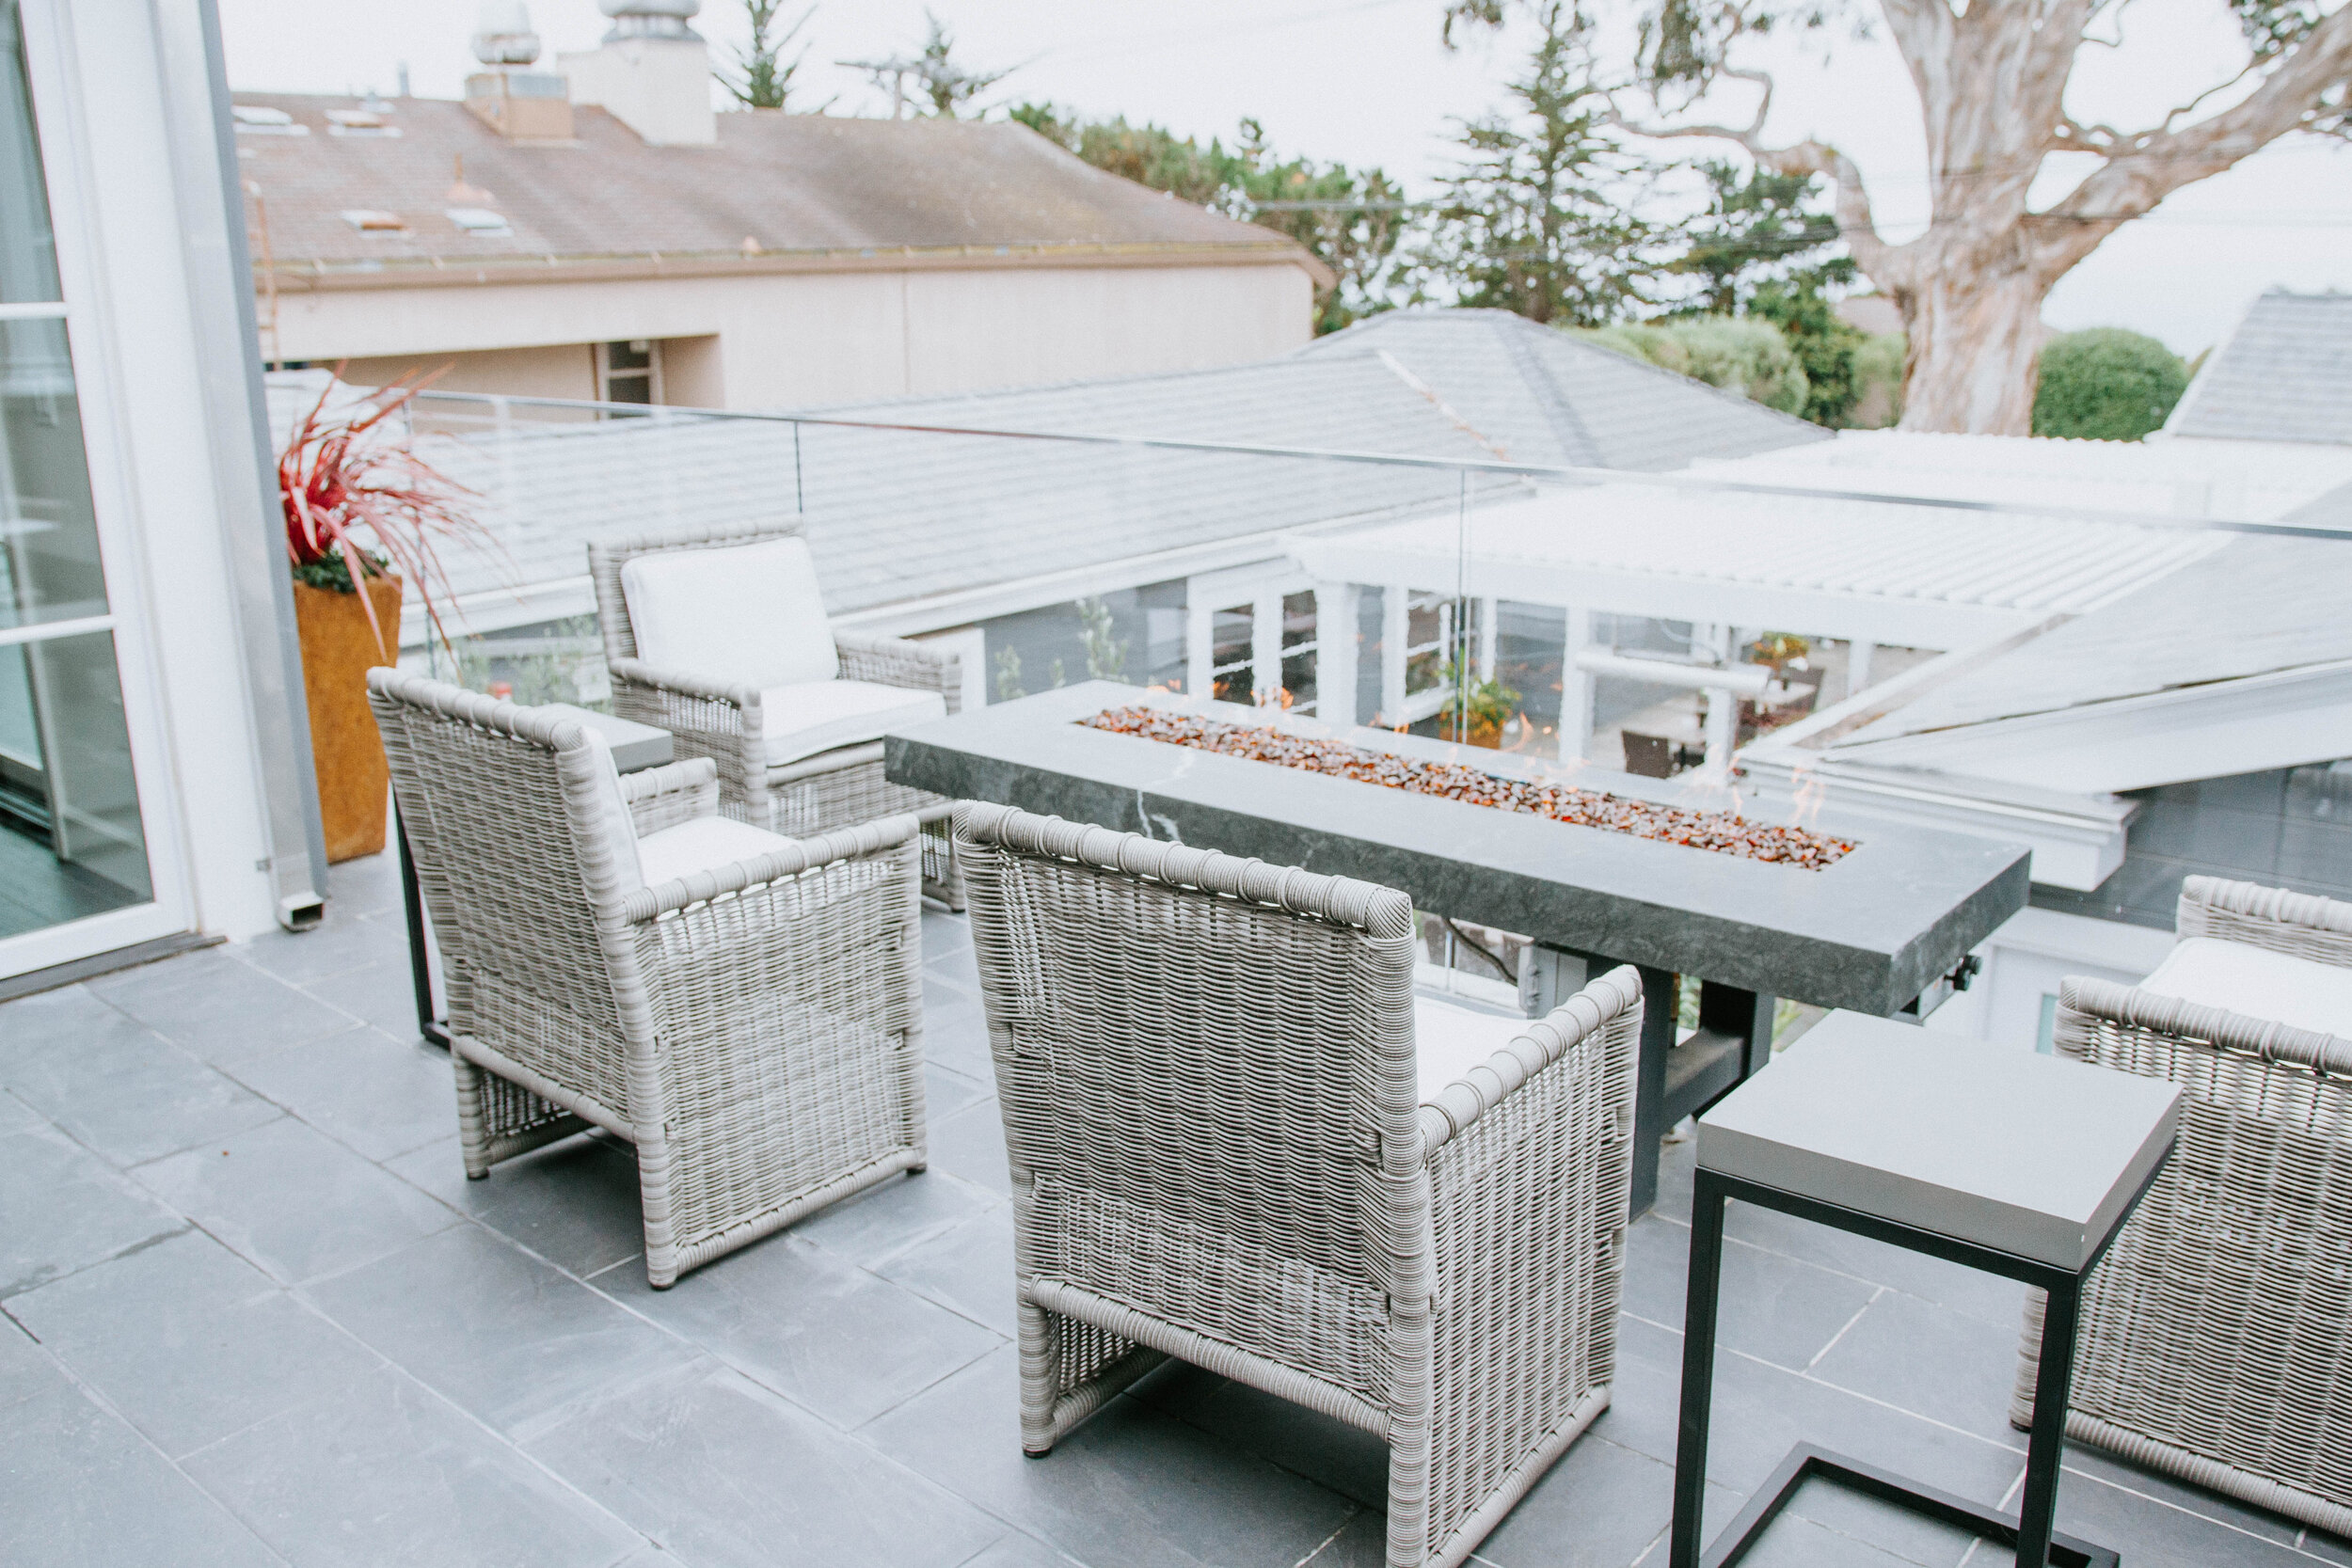 Fire Table with Chairs Overlooking Courtyard and Oceanview